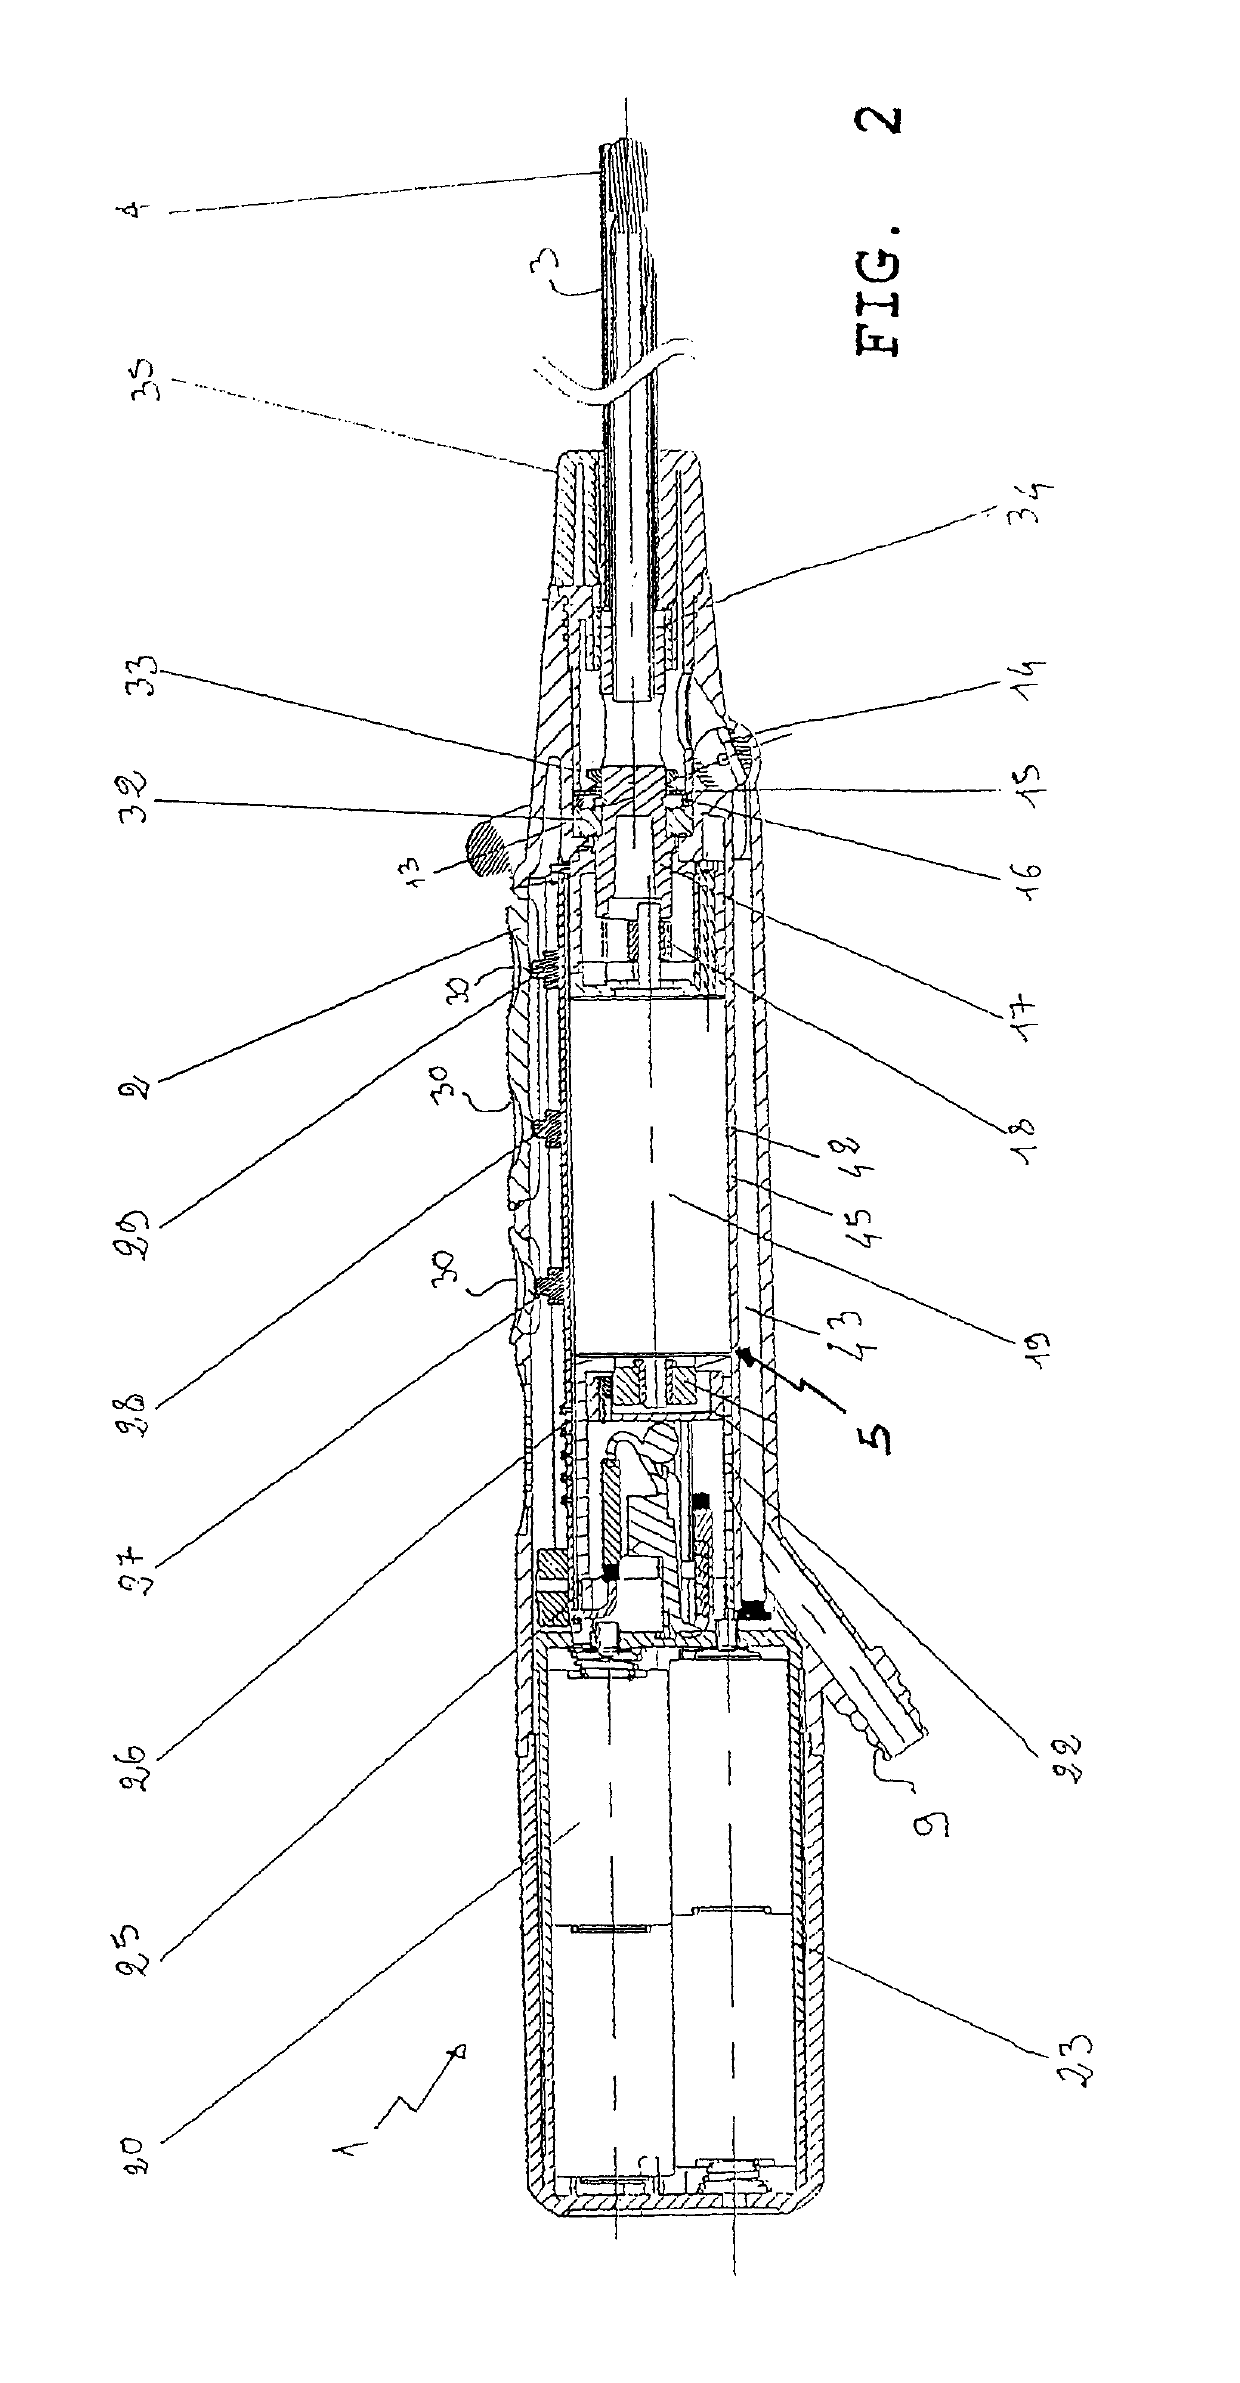 Device for treatments of endoscopic resection/removal of tissues